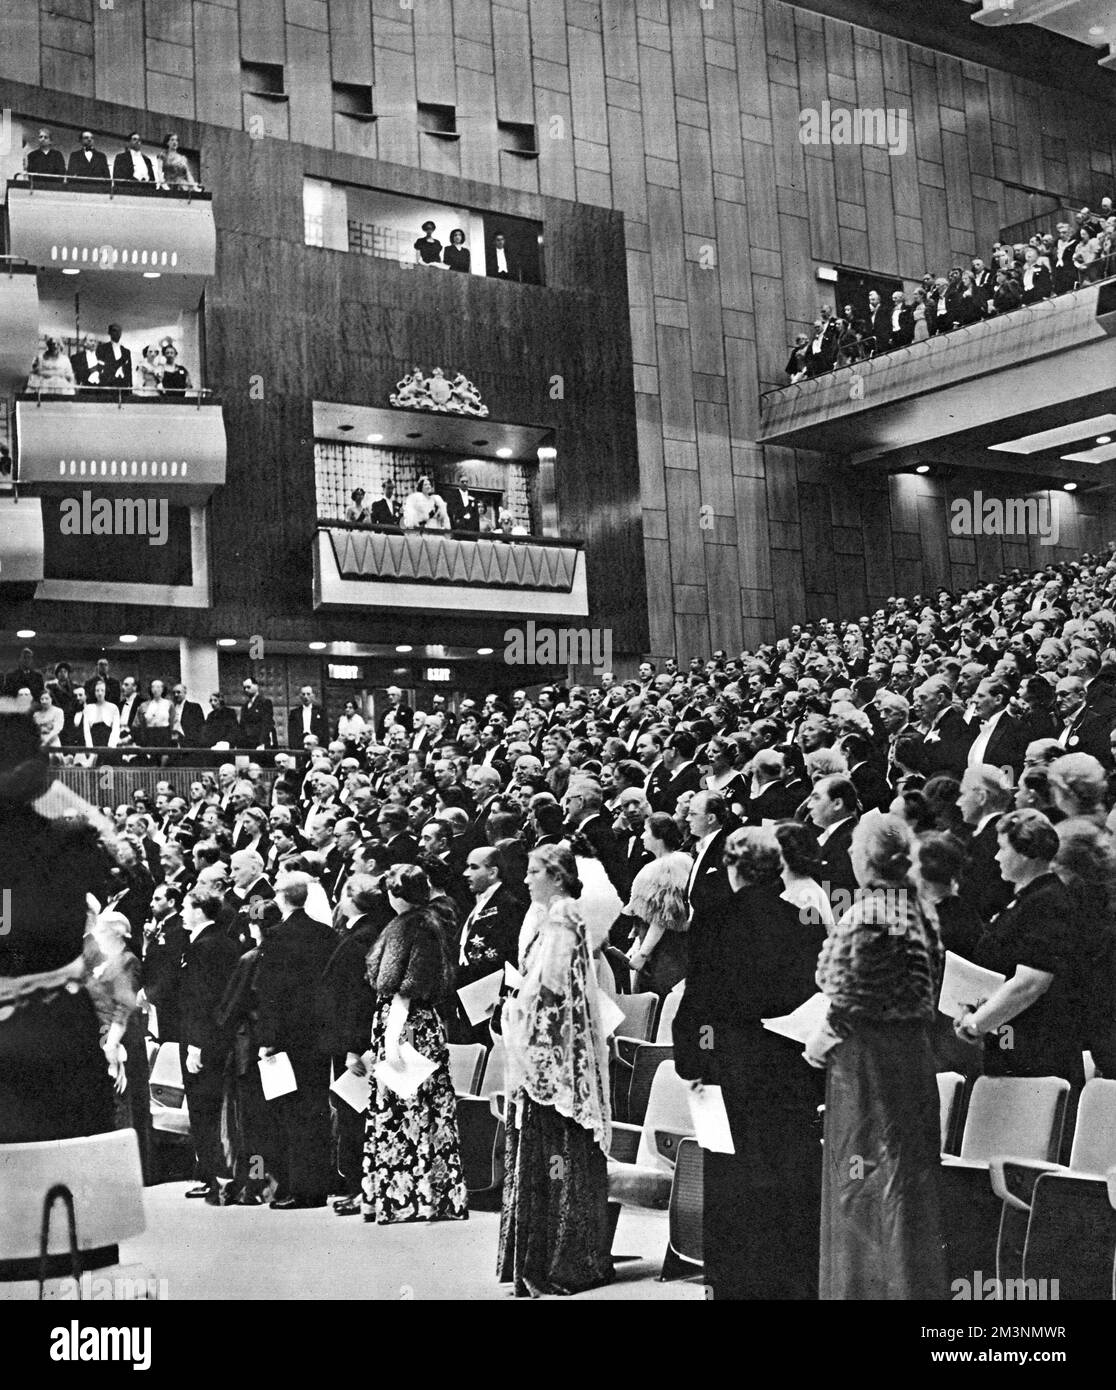 Scene at the royal opening of the new Royal Festival Hall, on the South Bank, London, with a full auditorium, and members of the royal family in the royal box -- King George VI and Queen Elizabeth, Princess Elizabeth and the Duke of Edinburgh, and Princess Margaret.  After the National Anthem came a service of dedication, with a short address by the Archbishop of Canterbury, then an inaugural concert with suitably patriotic British music.      Date: 3 May 1951 Stock Photo